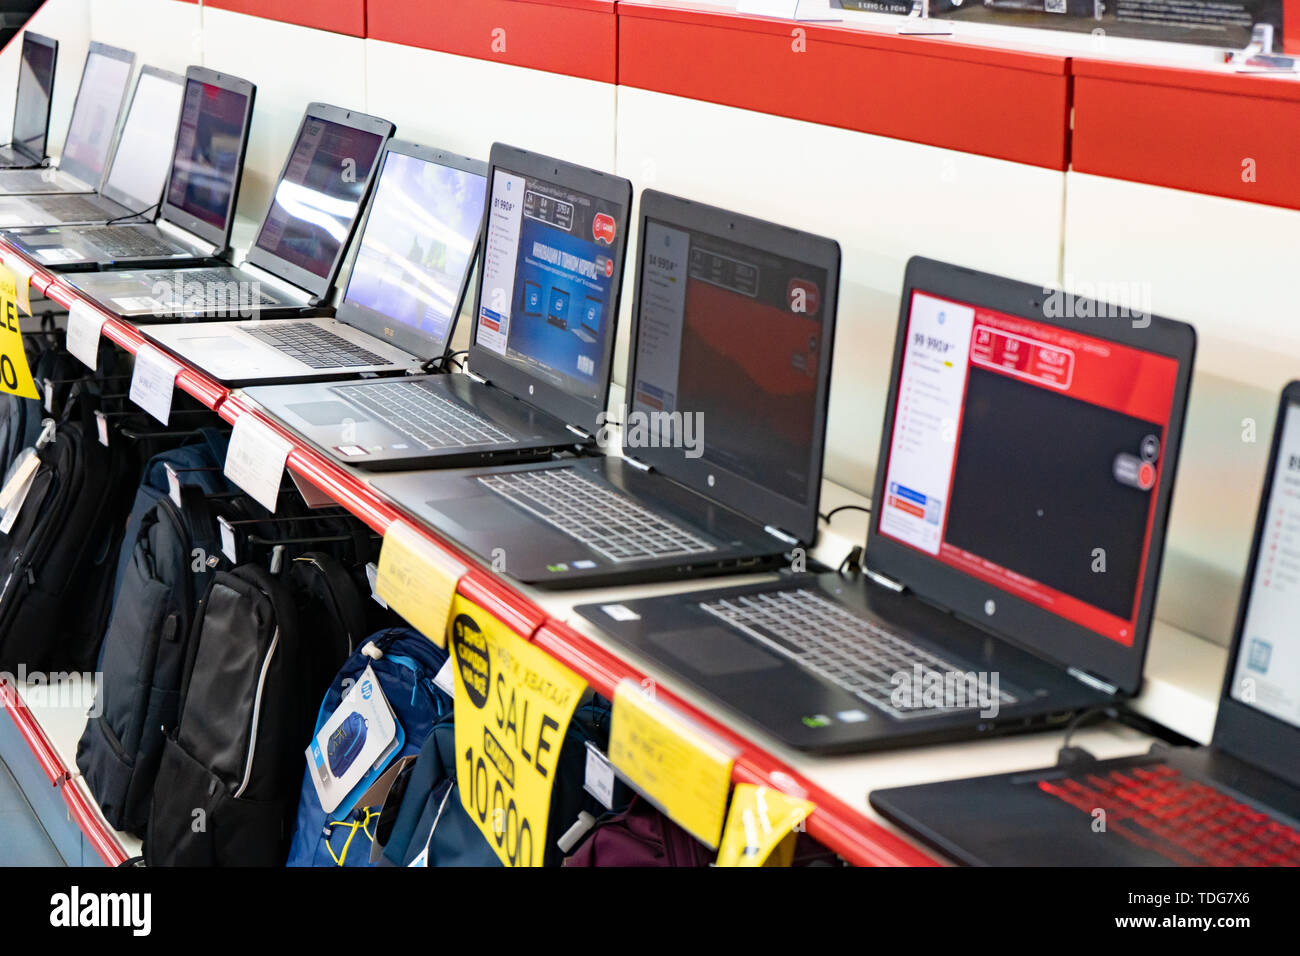 Chelyabinsk Region, Russia - June 2019. Household electrical appliances store M Video. Shelving with goods. Computers and laptops. Stock Photo